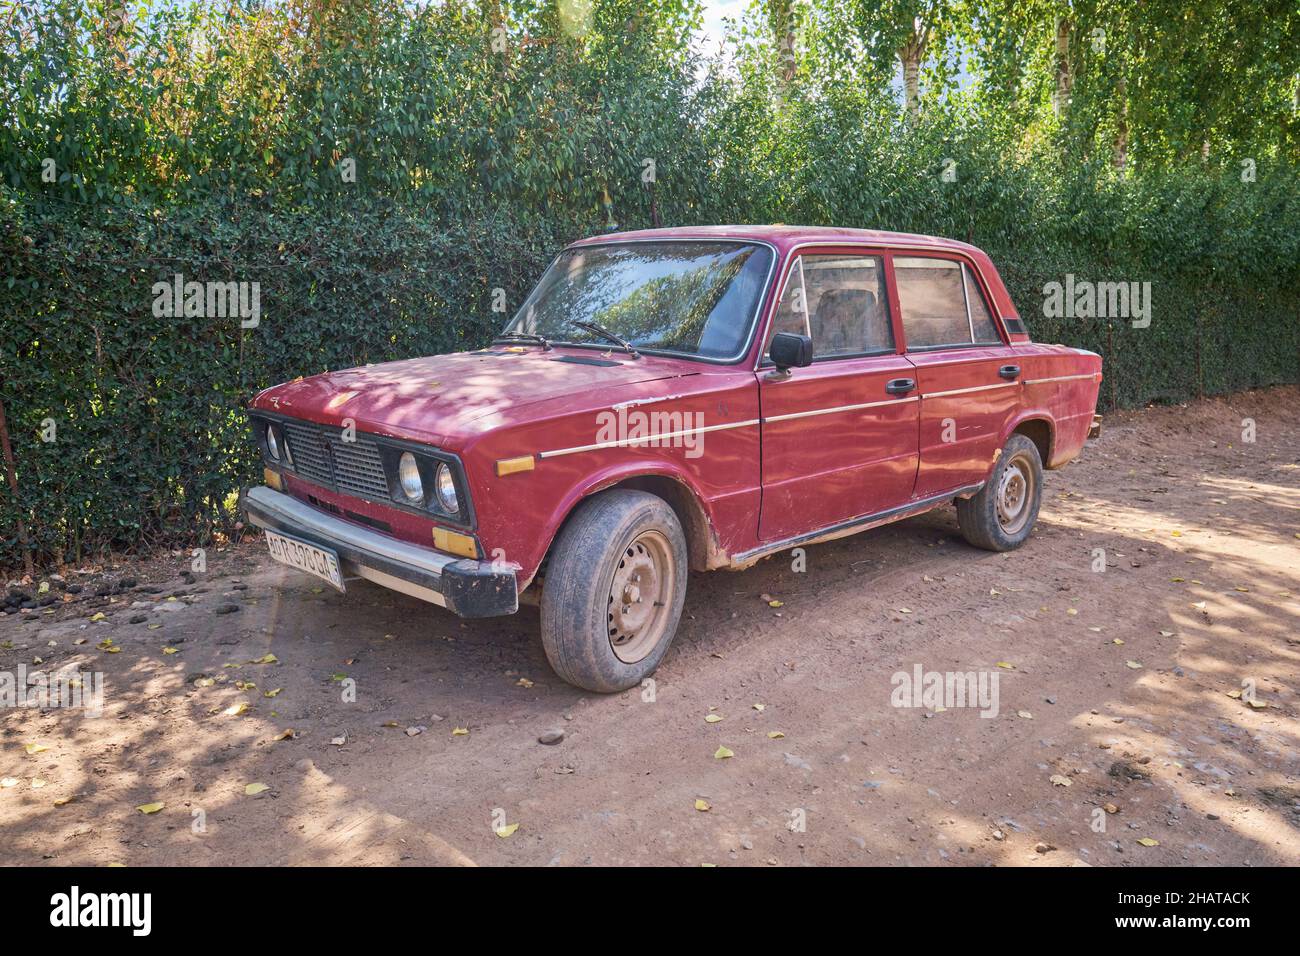 An old, Russian red Lada car parked on a dusty rural road in the country. In the Lake Charvak resevoir area near Tashkent, Uzbekistan. Stock Photo